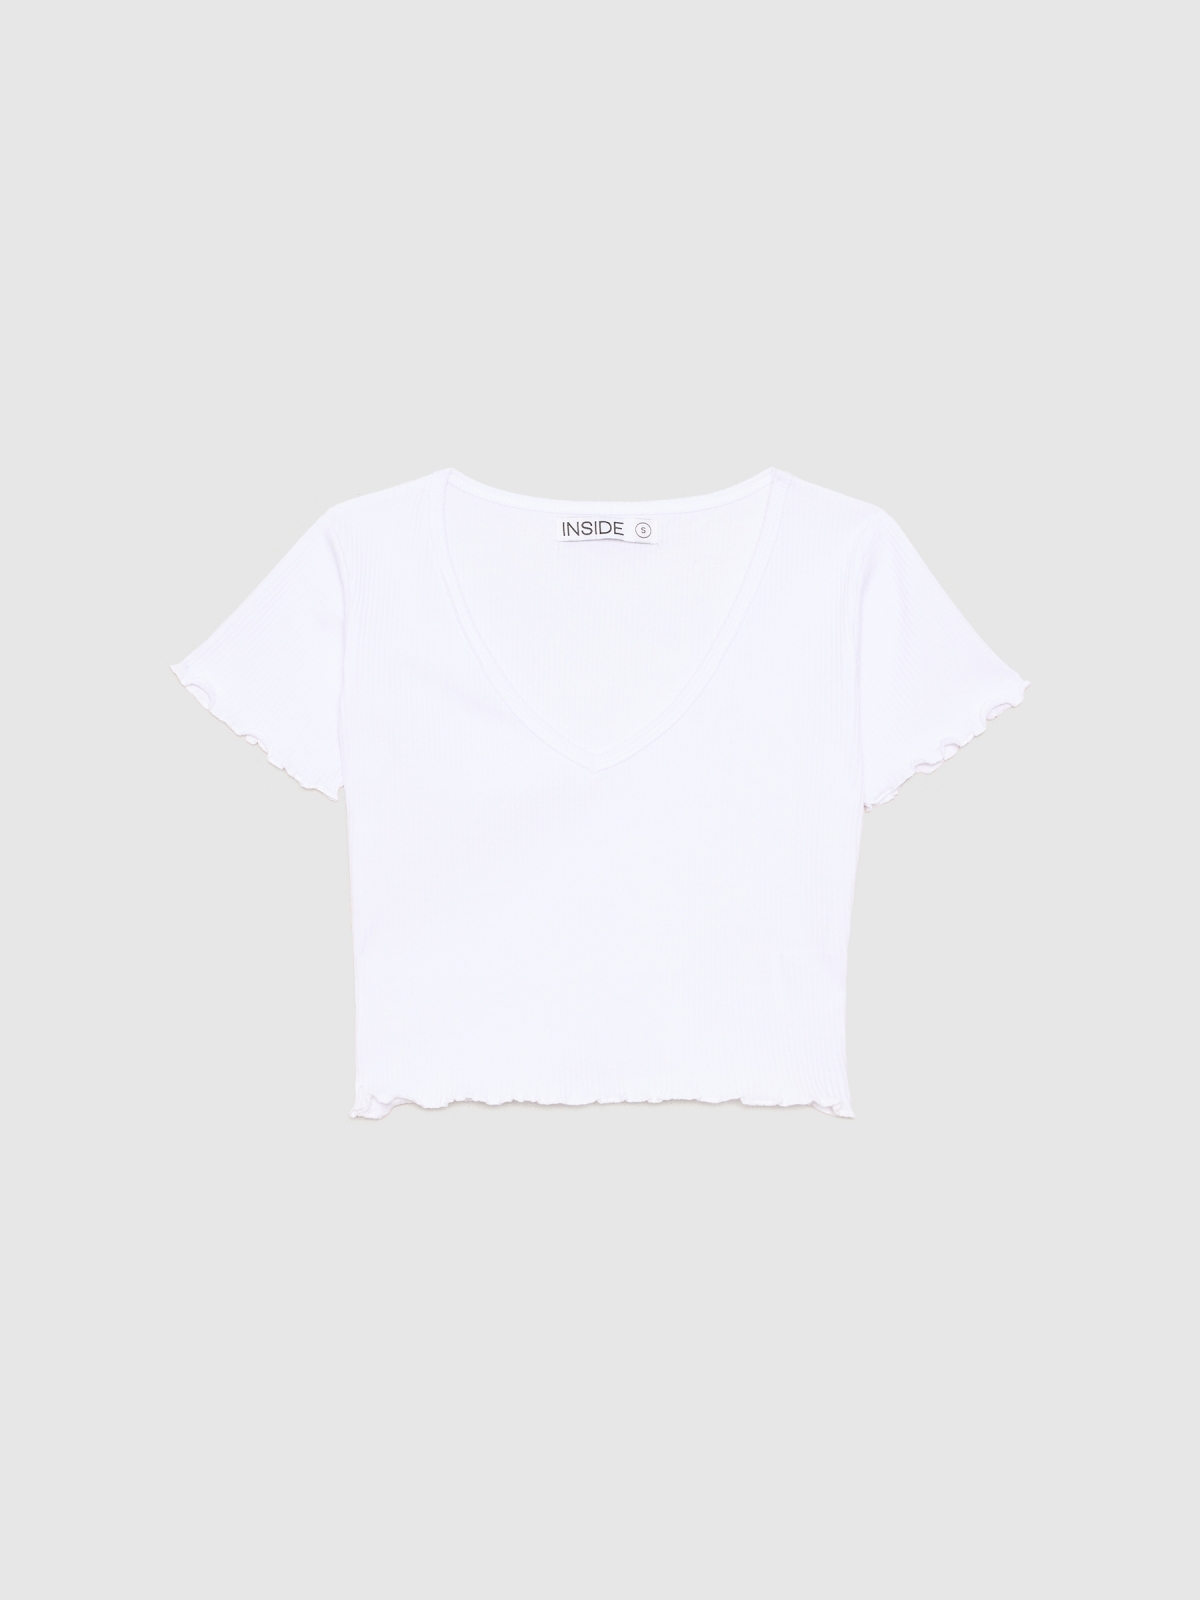  Crop T-shirt with curly peak white